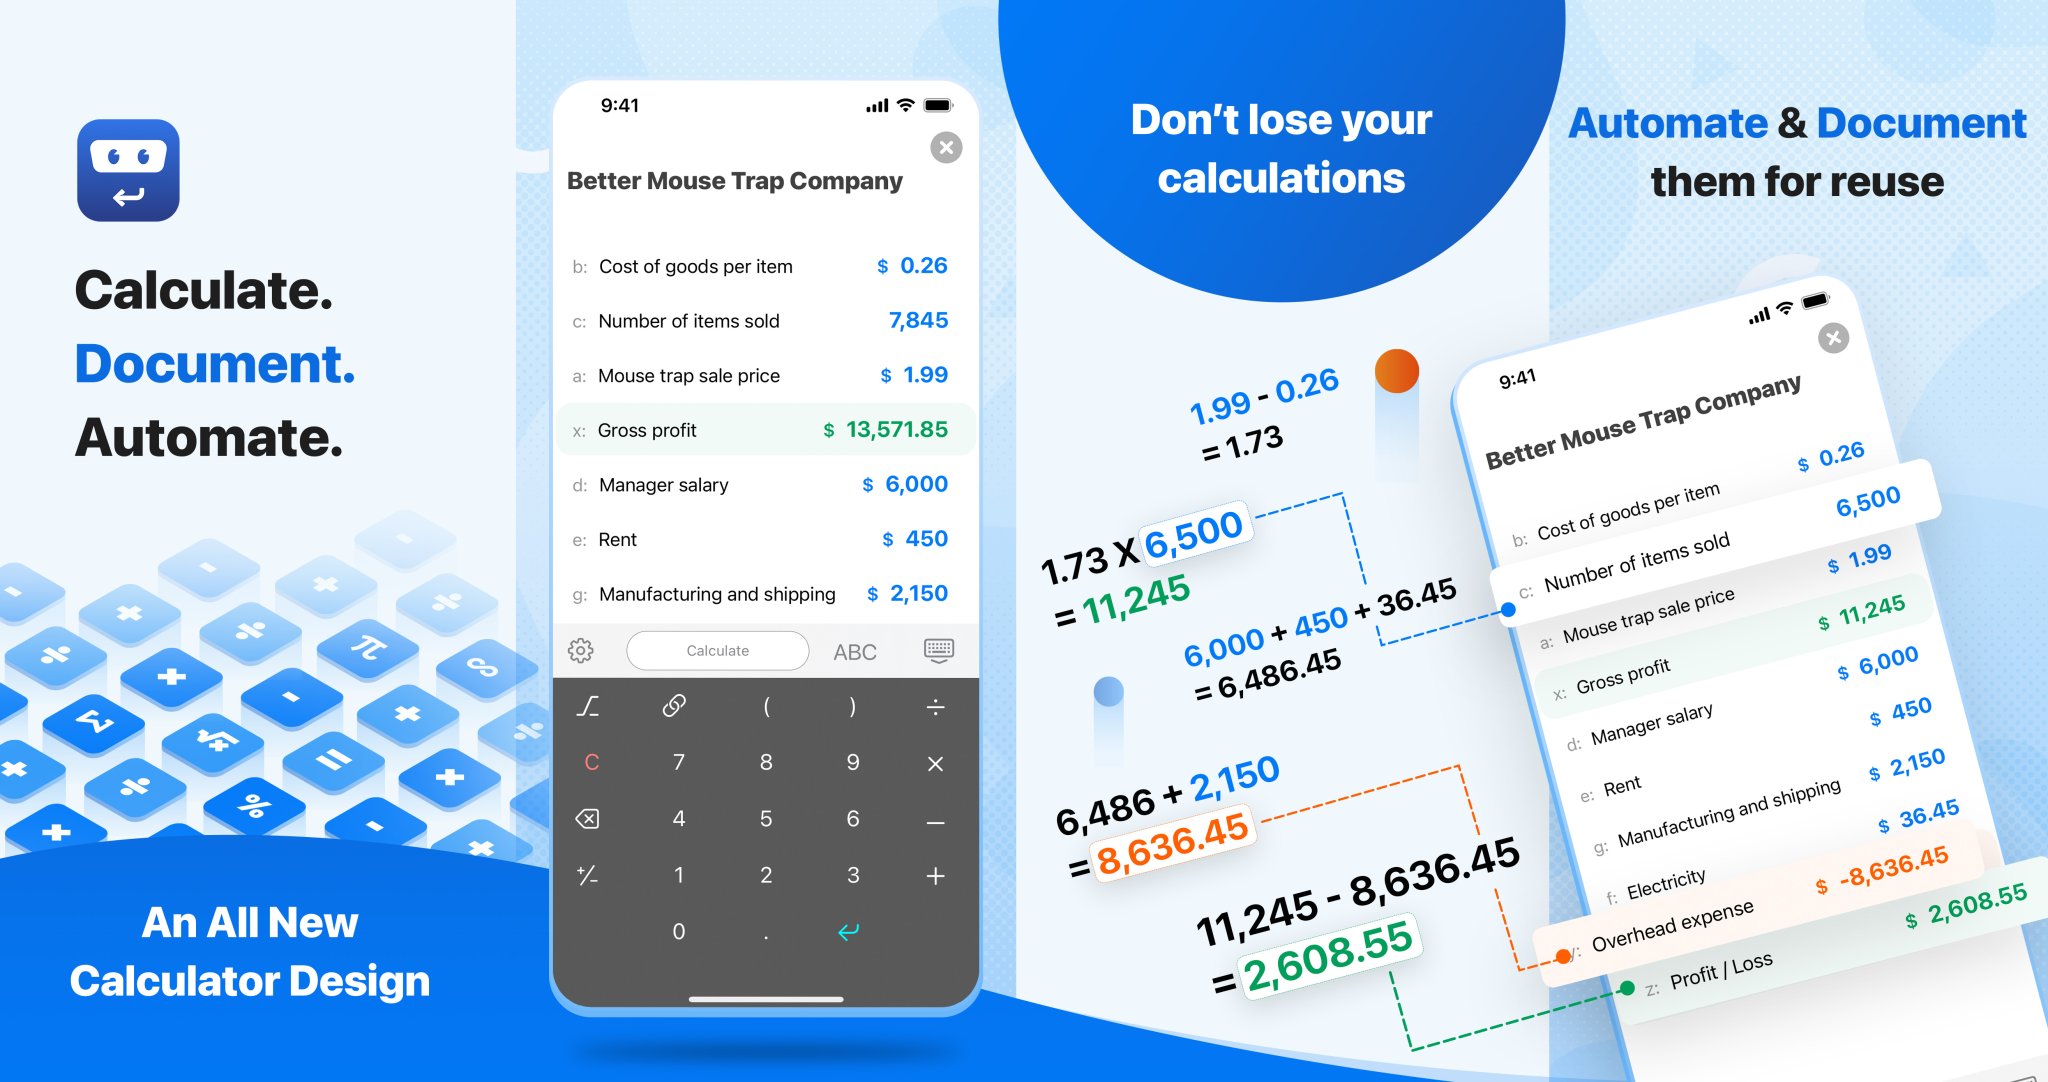 Solutionist 2 Instantly Automates and Saves Your Calculations